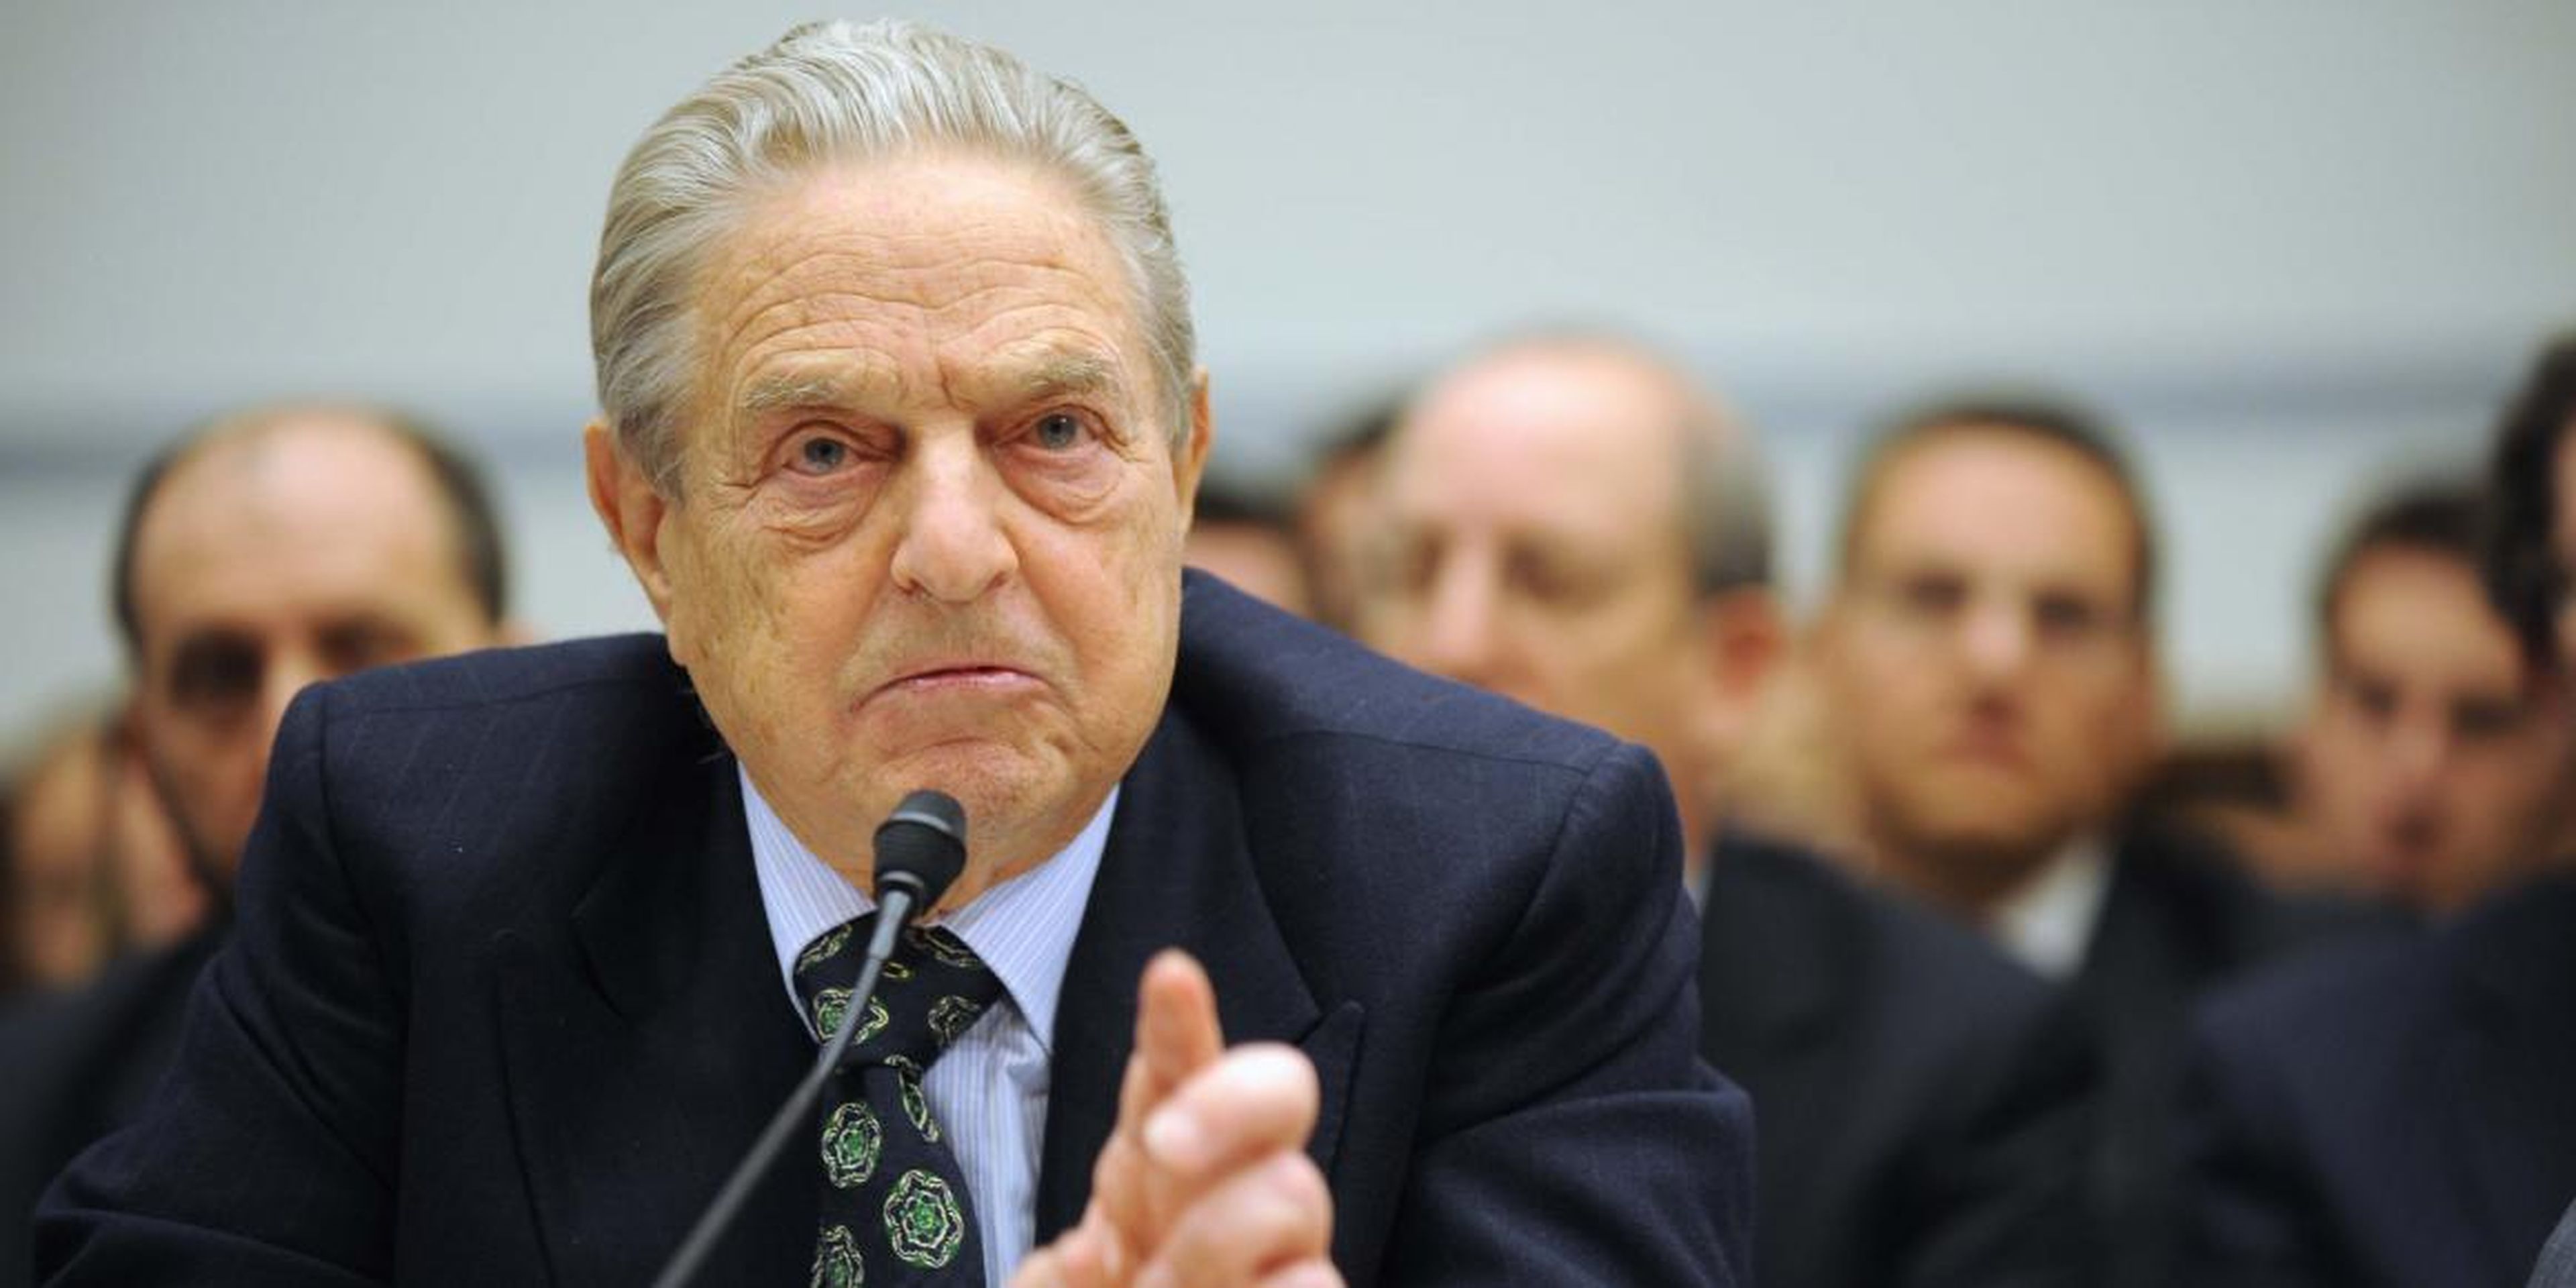 'UNPRECEDENTED DANGER': Billionaire investor George Soros just went scorched Earth on China during his annual Davos speech